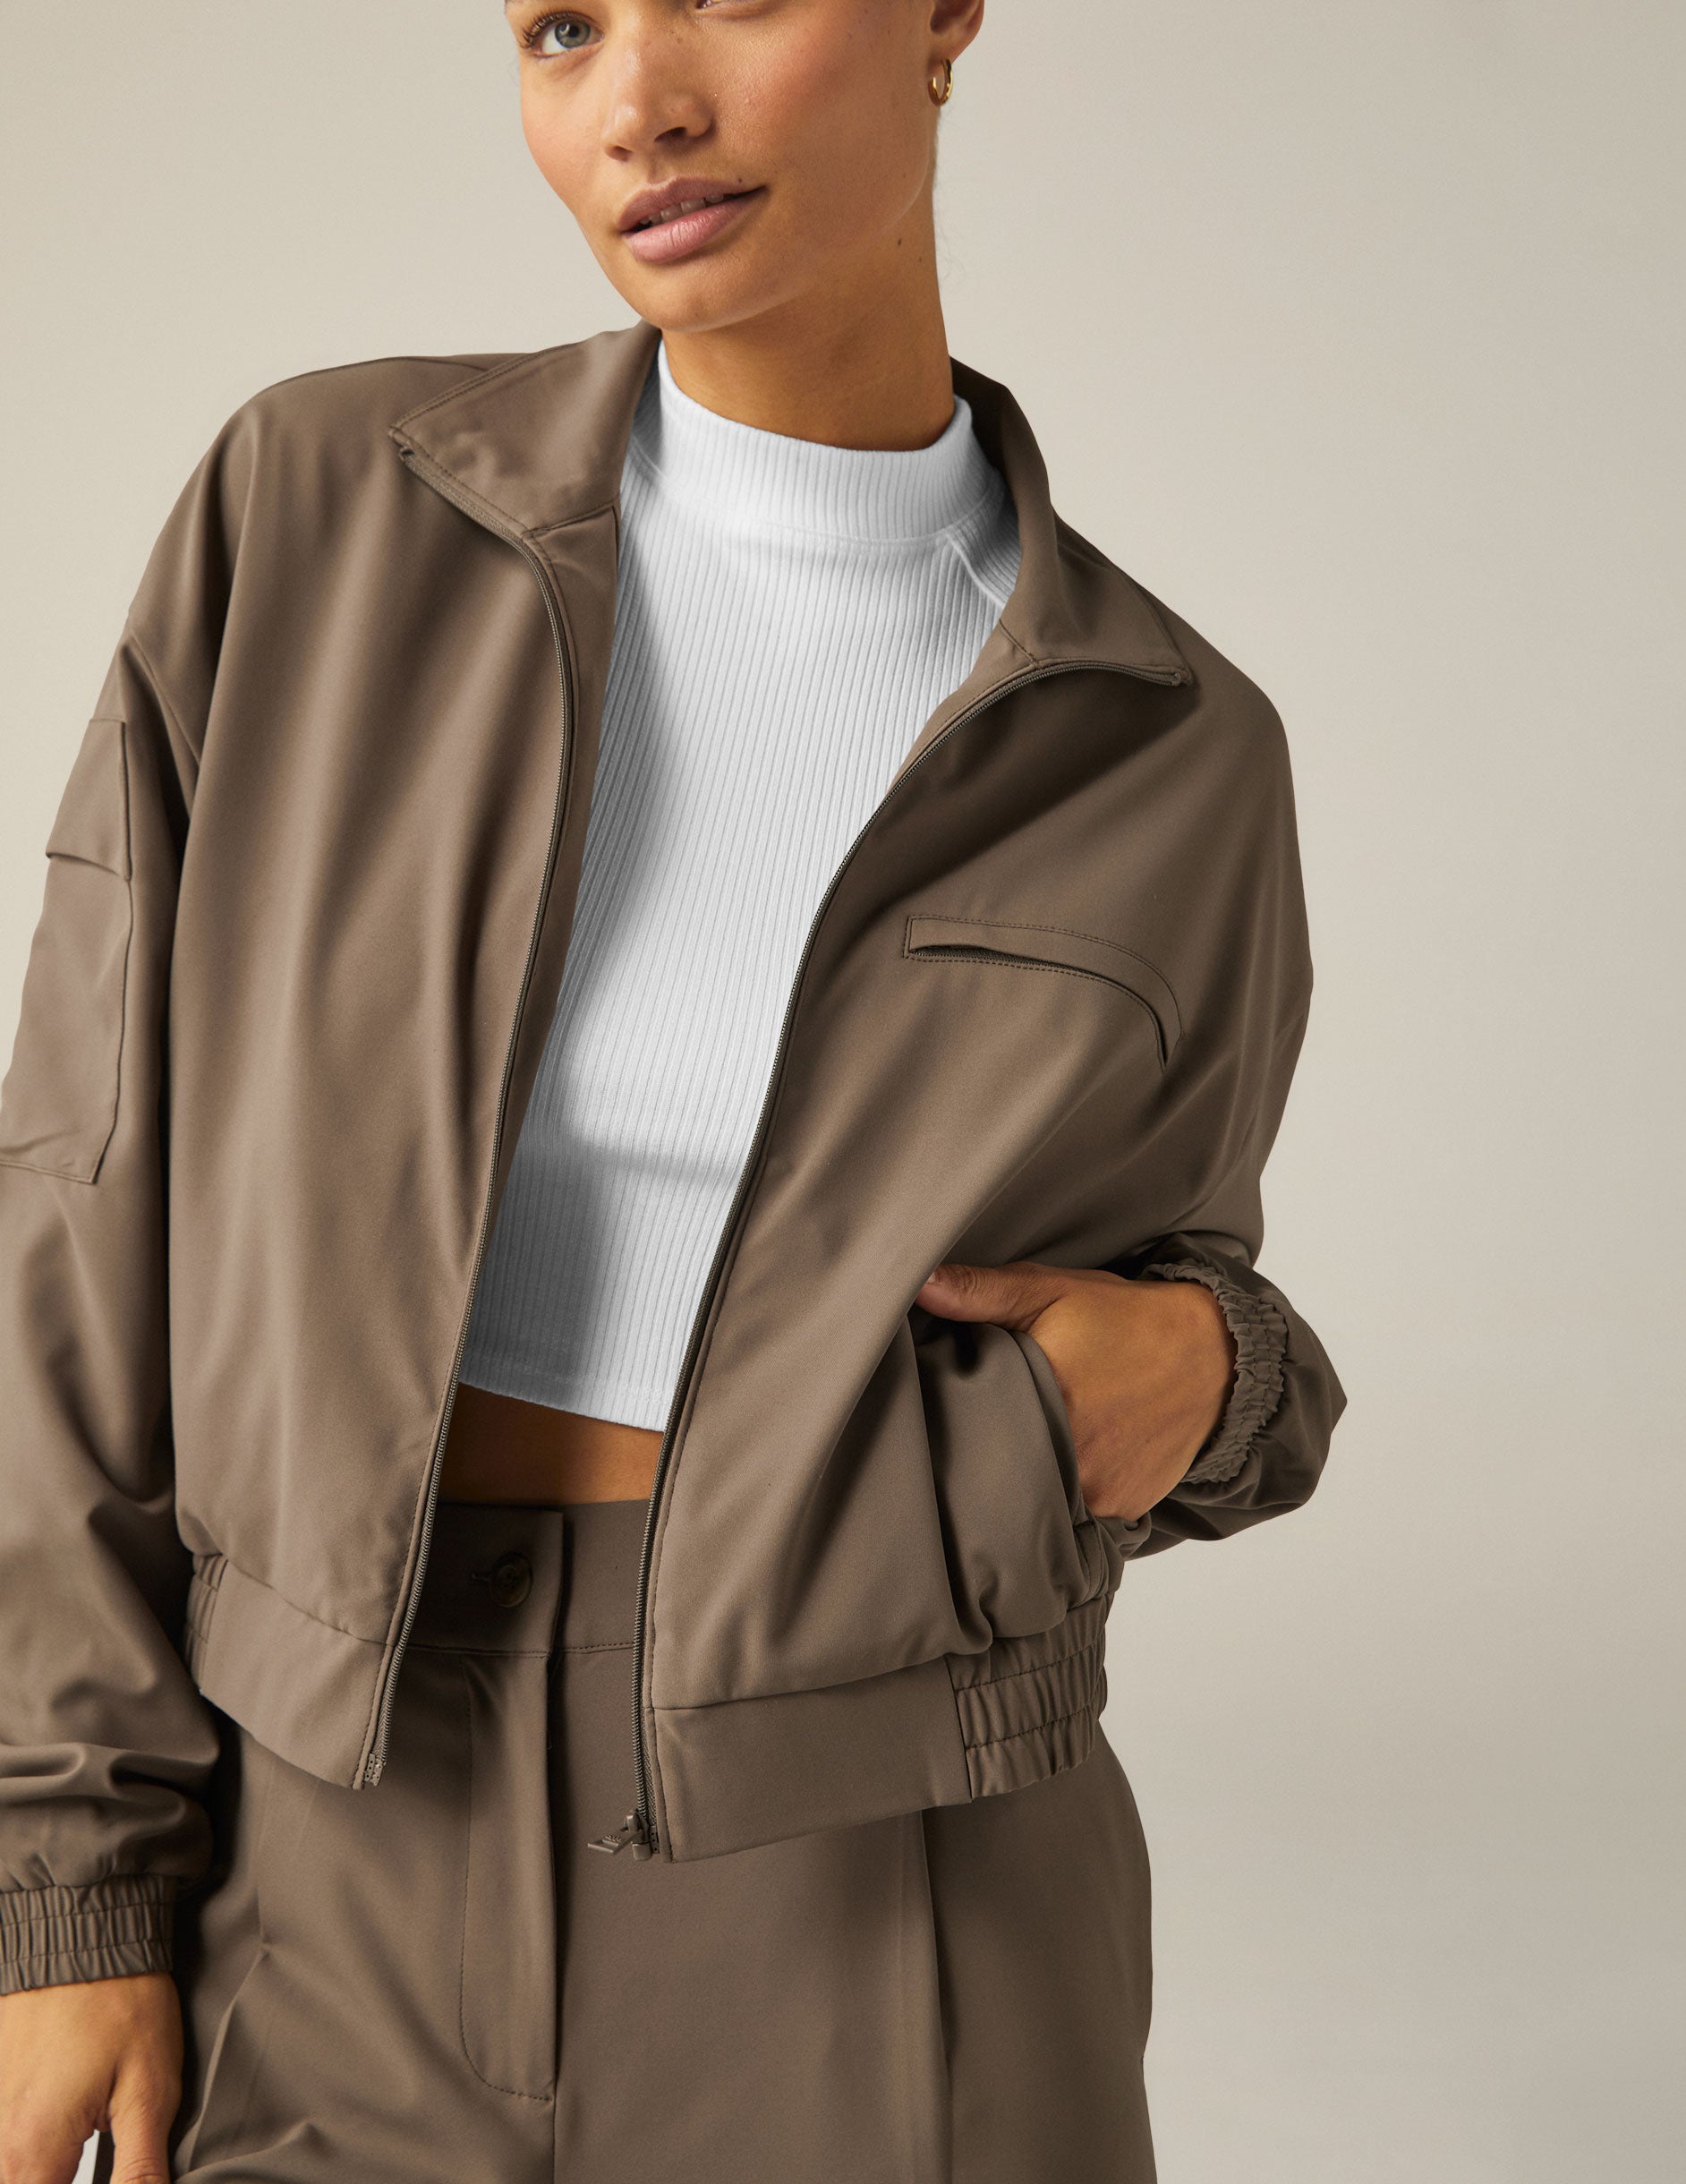 brown zip-up jetstretch woven jacket with a collar and pockets. 